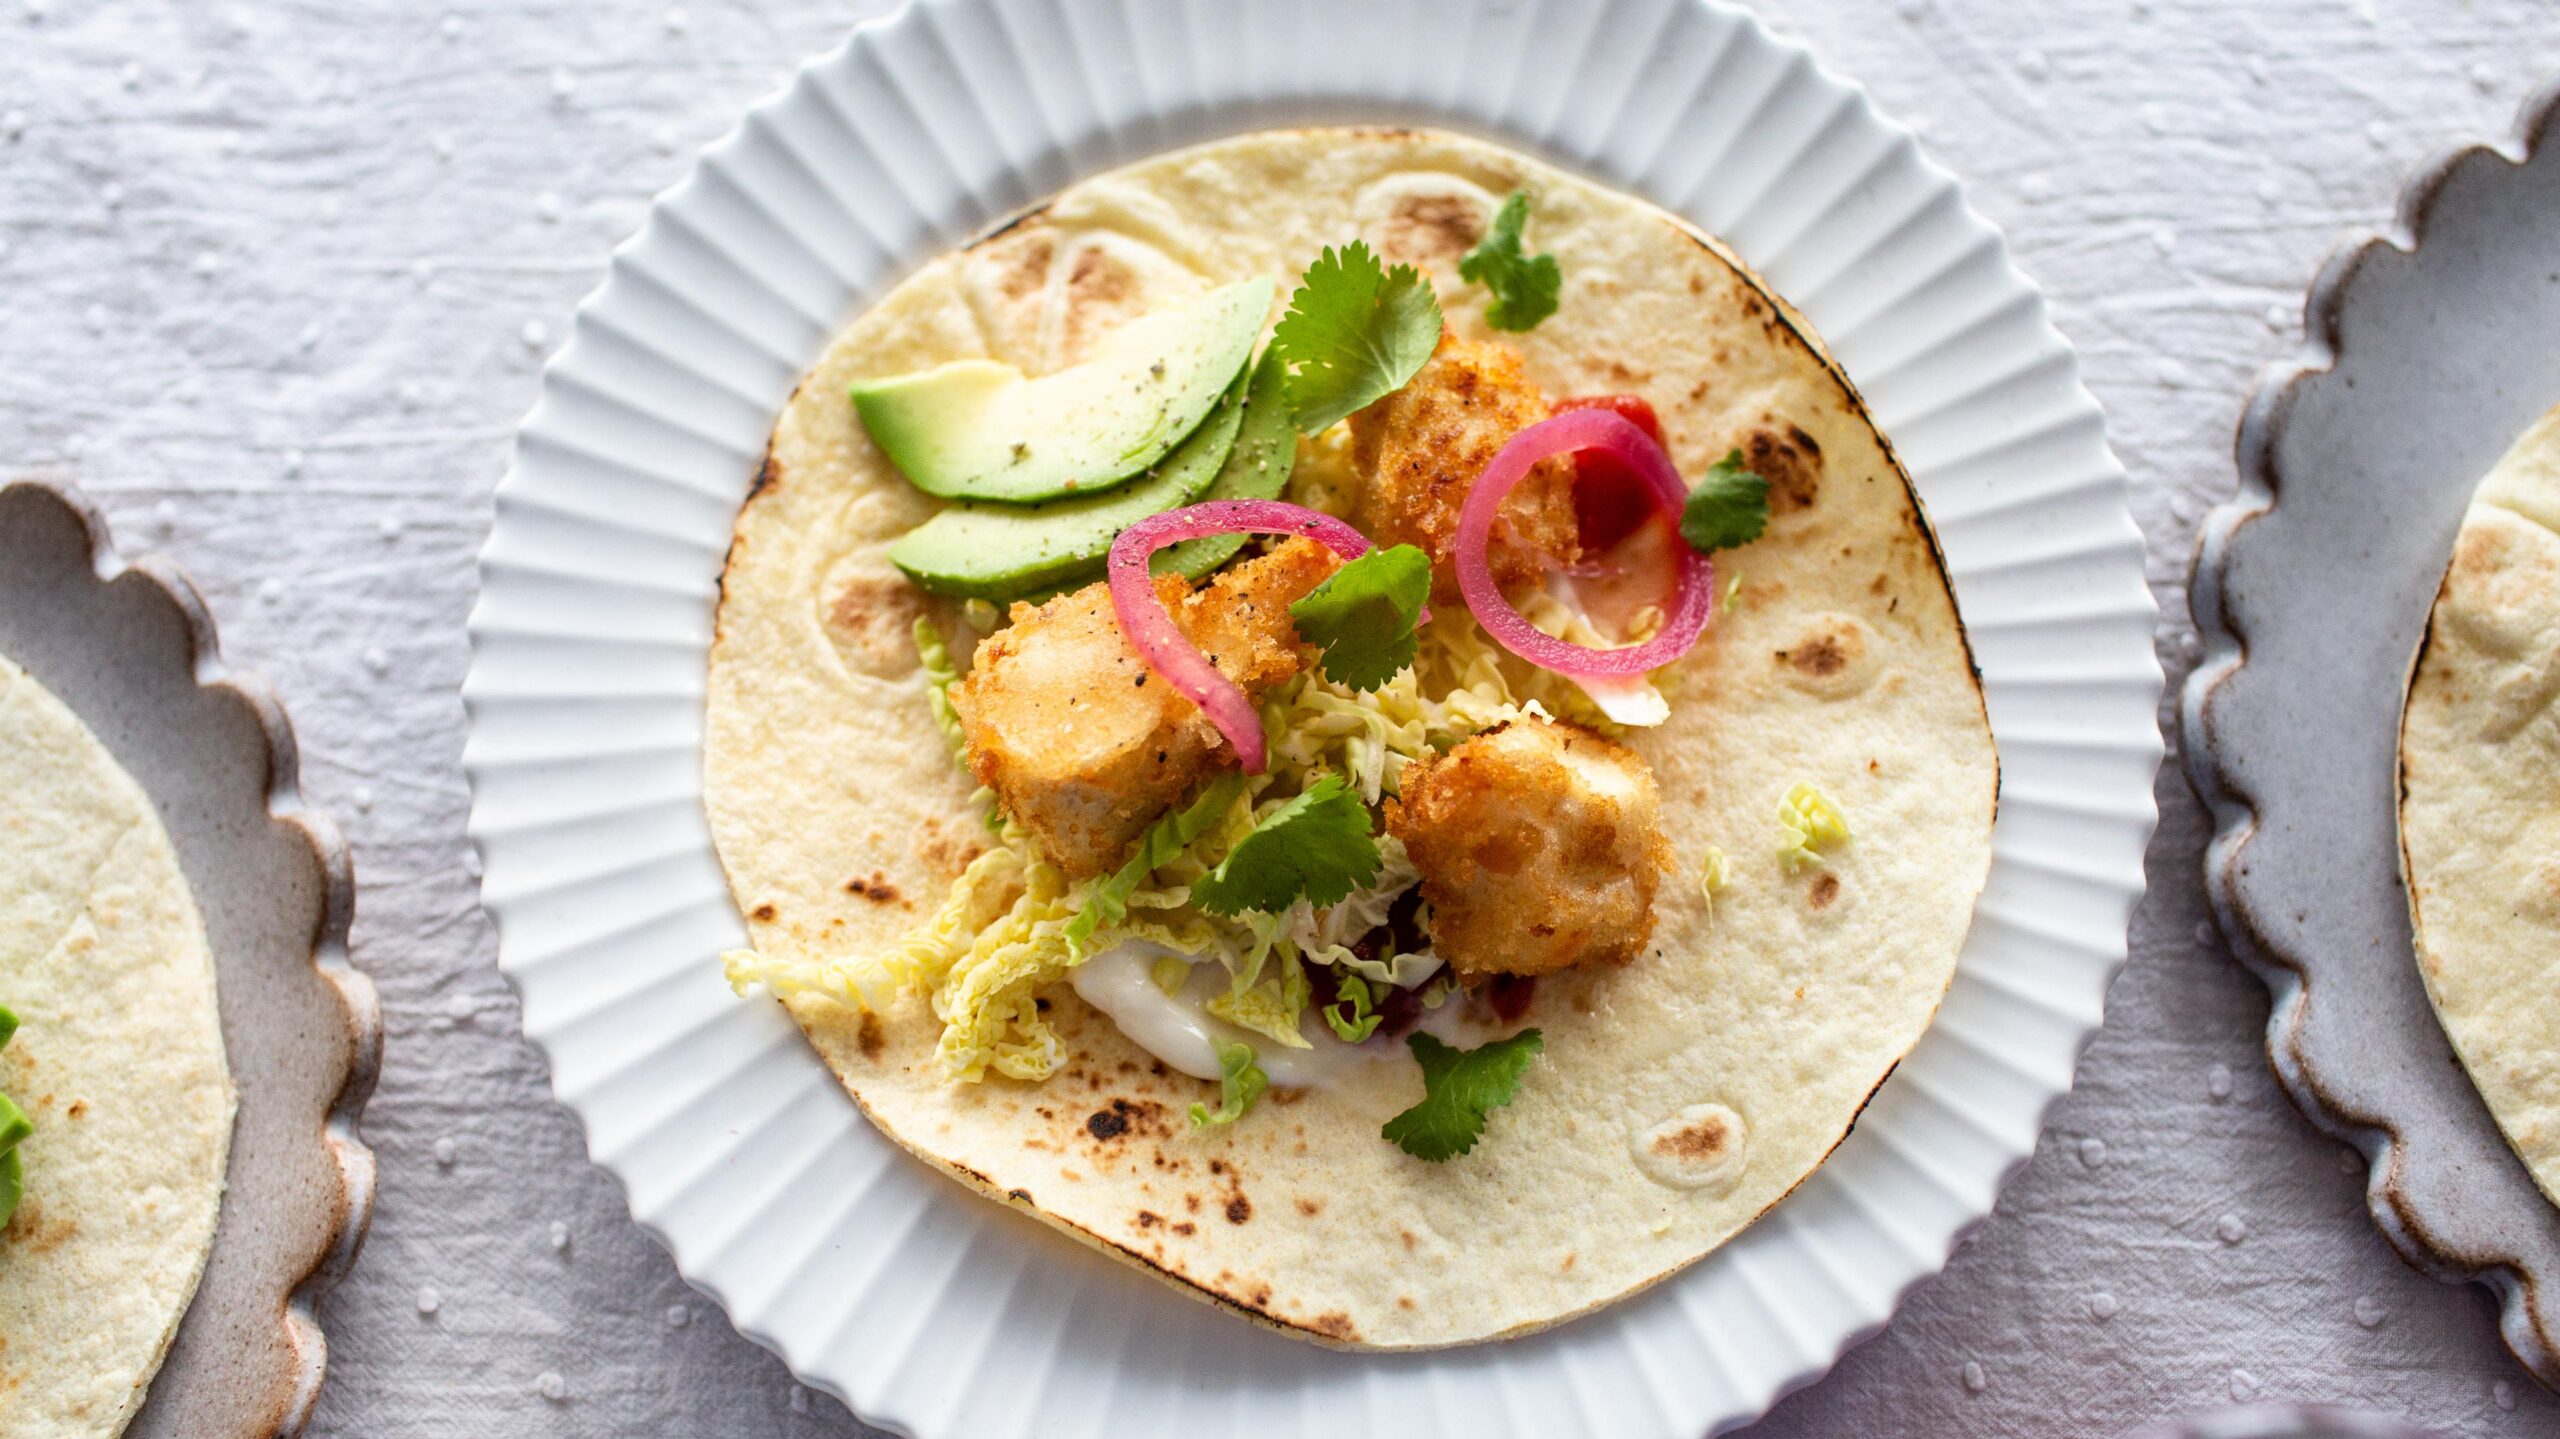  Pile up your tacos with tasty homemade guacamole, salsa and vegan 'fish'.